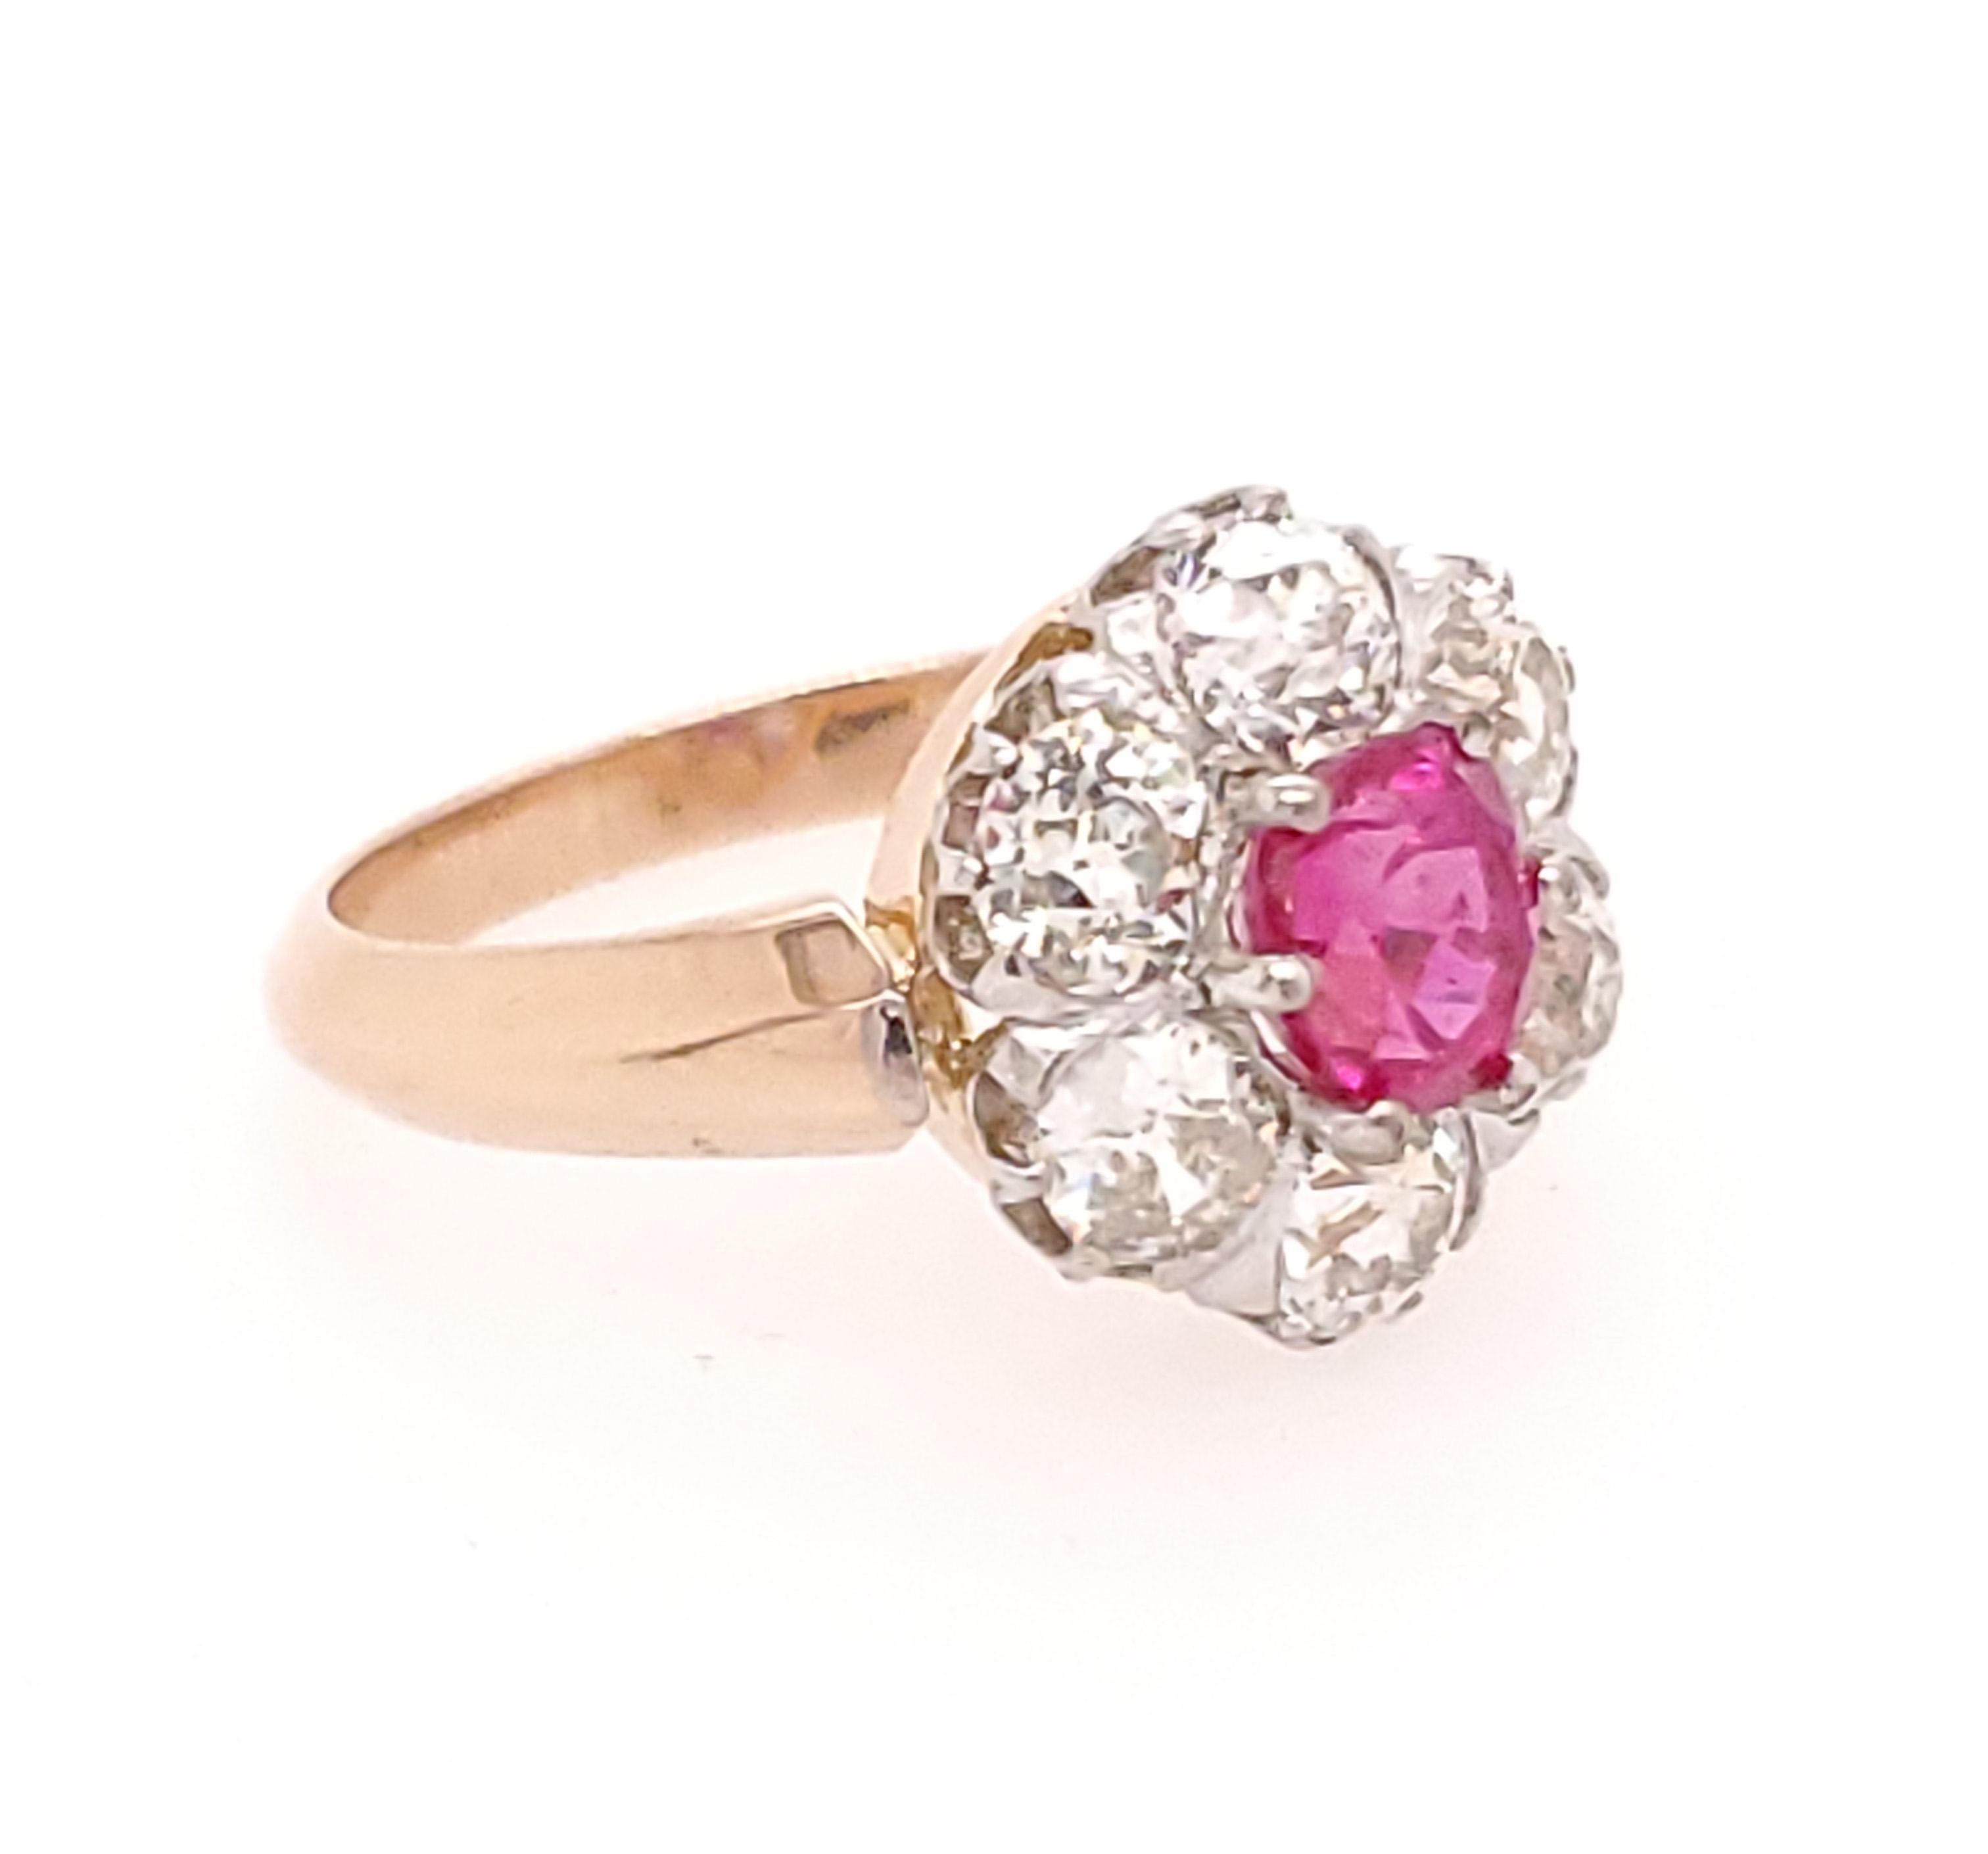 This is an heirloom quality 18K White and Rose Gold Diamond and Ruby Ring. There is 1.09ct Oval non heated Burma Red Ruby GIA #2201383822 Classically styled with (6) Old Mine Diamonds, H-J in Color, VS in Clarity weighing approximately 1.80ctw